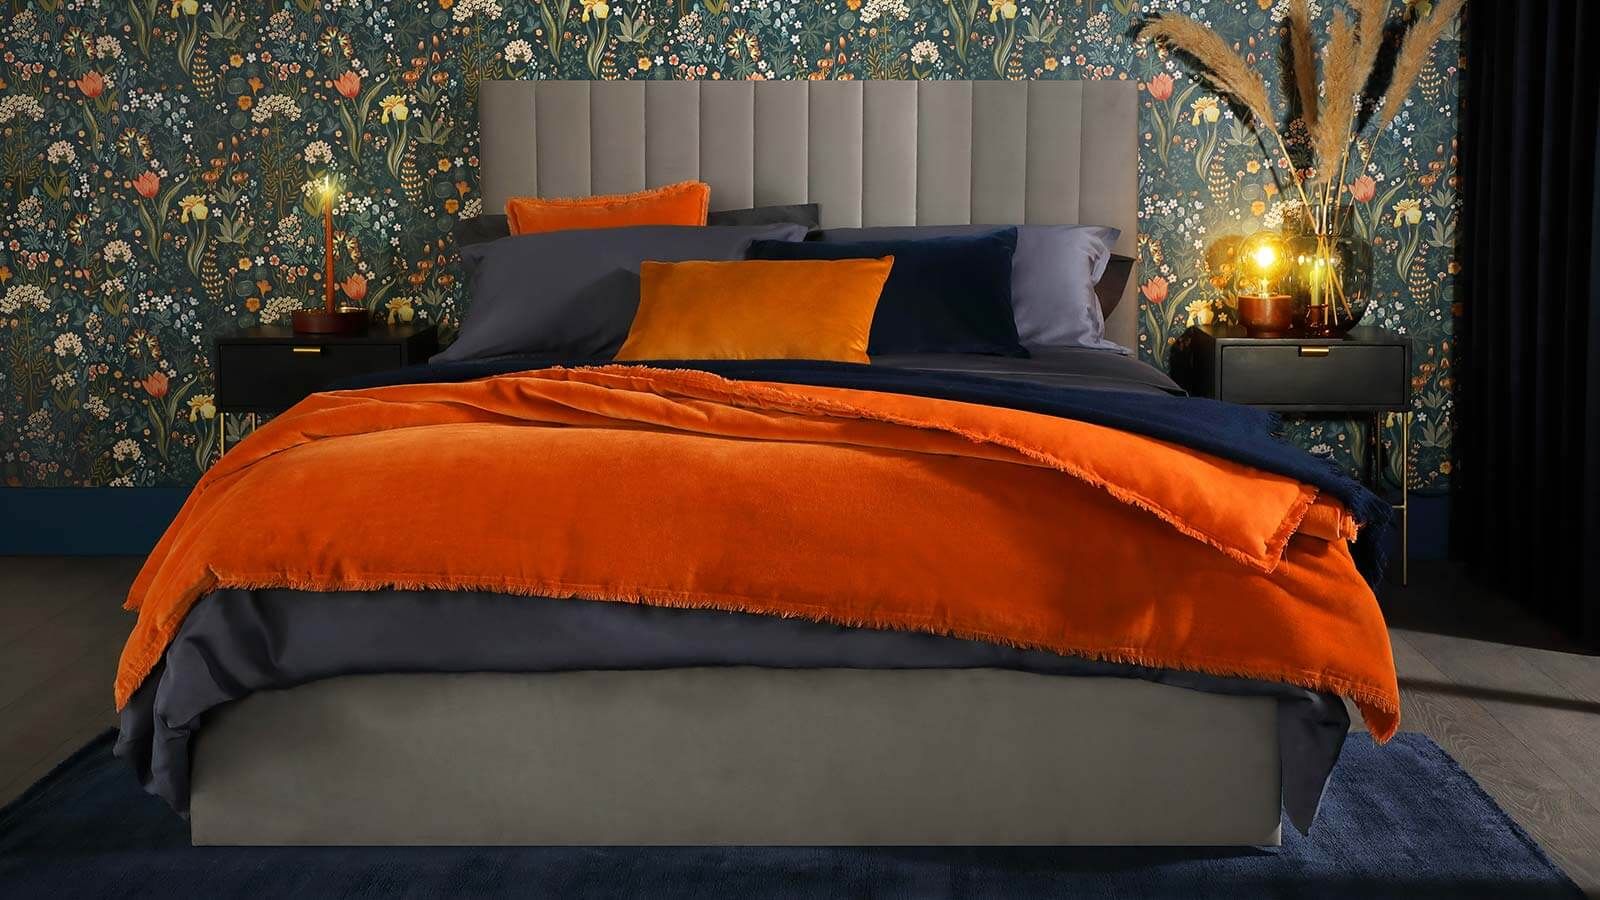 3 ways to transform your bedroom with wallpaper